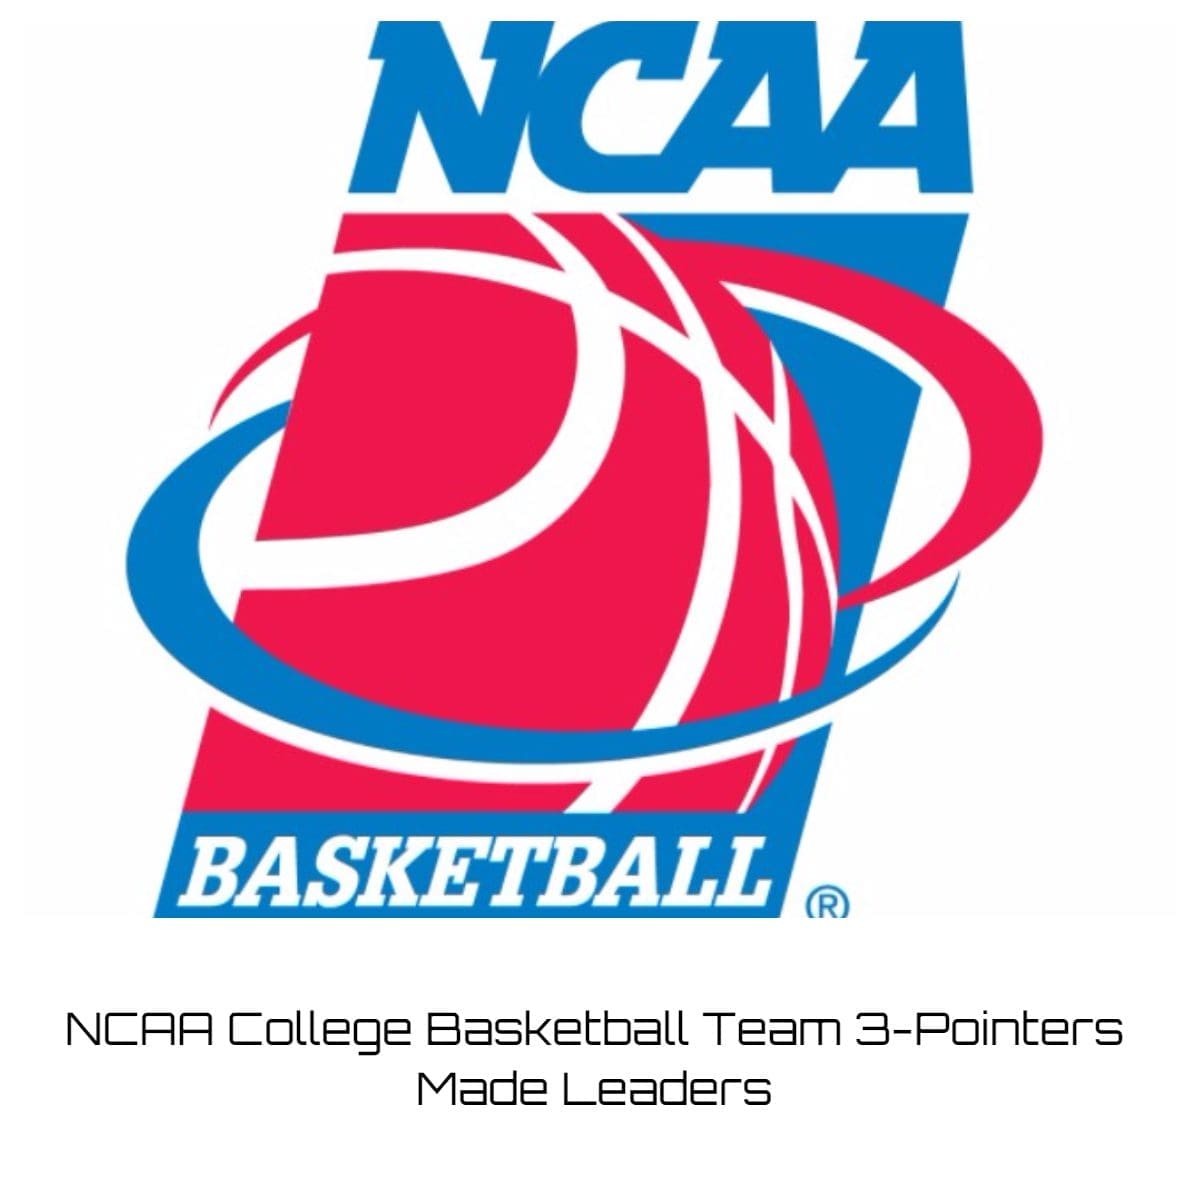 NCAA College Basketball Team 3-Pointers Made Leaders